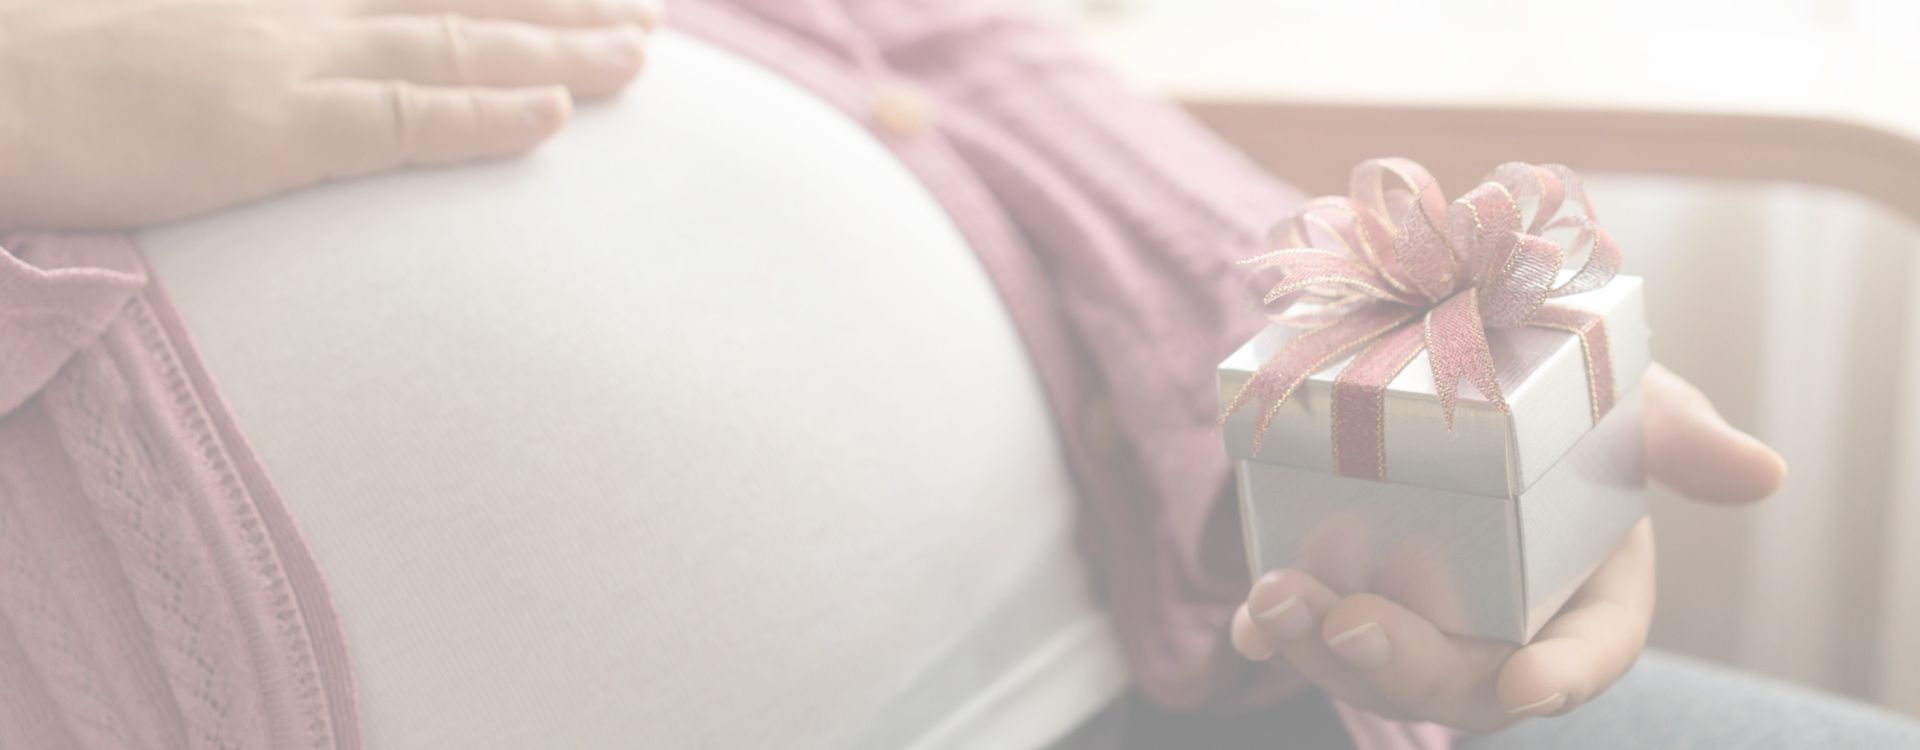 What Gifts Should Pregnant Women Ask for At Christmas? Article Image